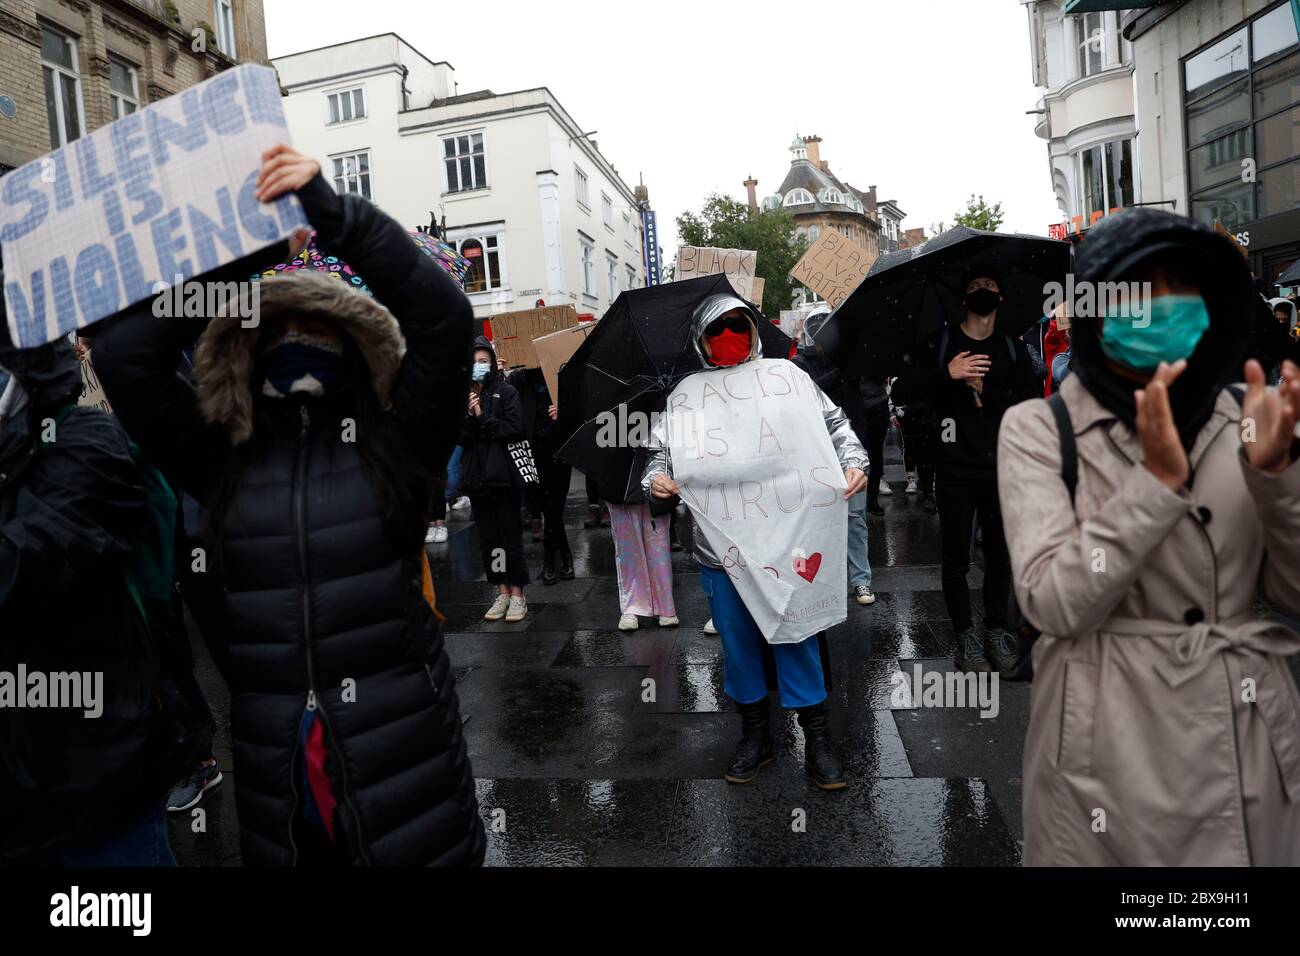 Leicester, Leicestershire, UK. 6th June 2020. Protesters attend a 'Black lives matter' demonstration following the death of American George Floyd while in the custody of Minneapolis police. Credit Darren Staples/Alamy Live News. Stock Photo